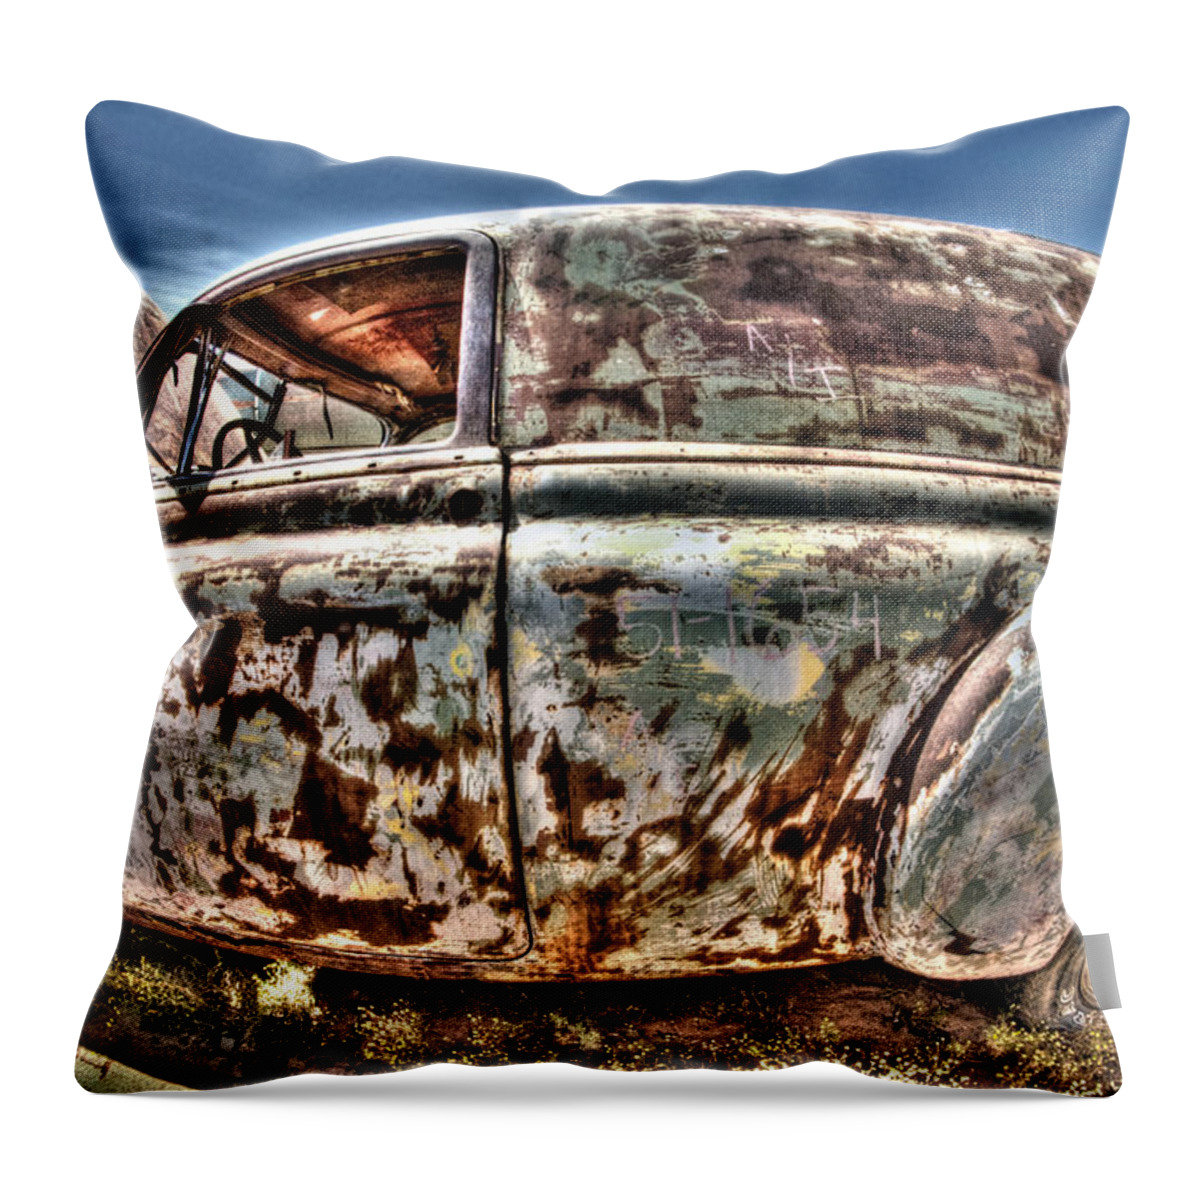 Rust Throw Pillow featuring the photograph Rusty Old American Dreams - 4 by Mark Valentine